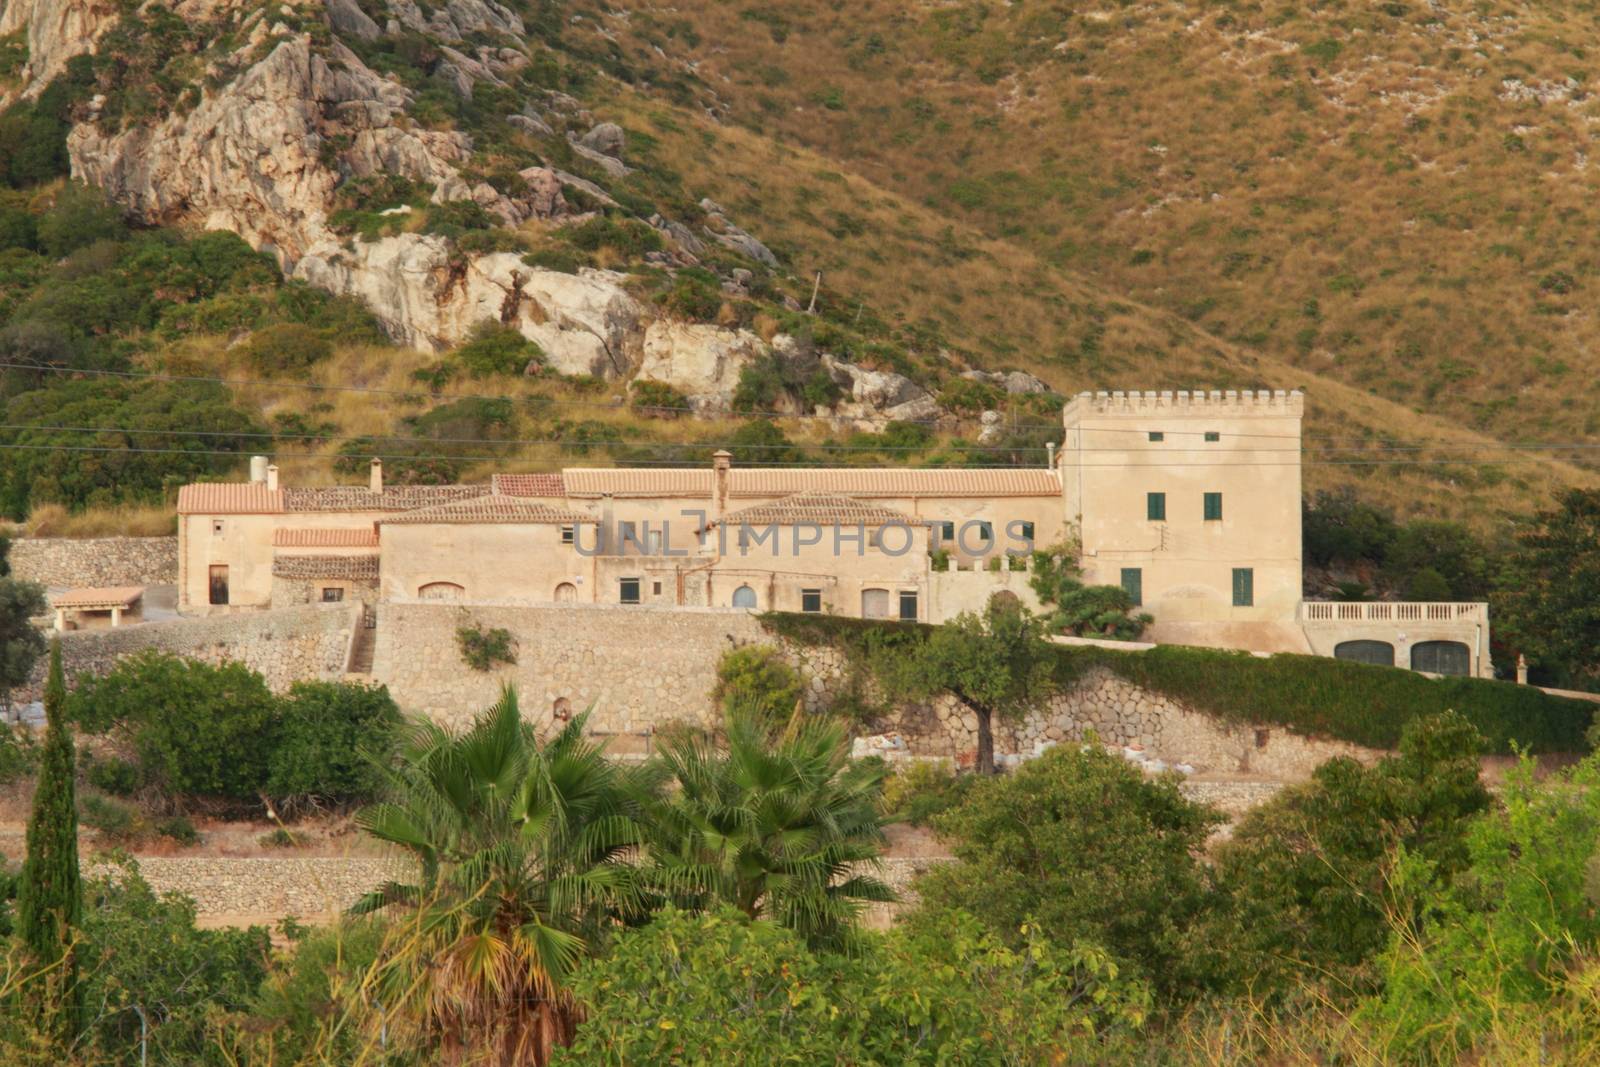 View of a disused finca near Puerto Pollensa by mitzy